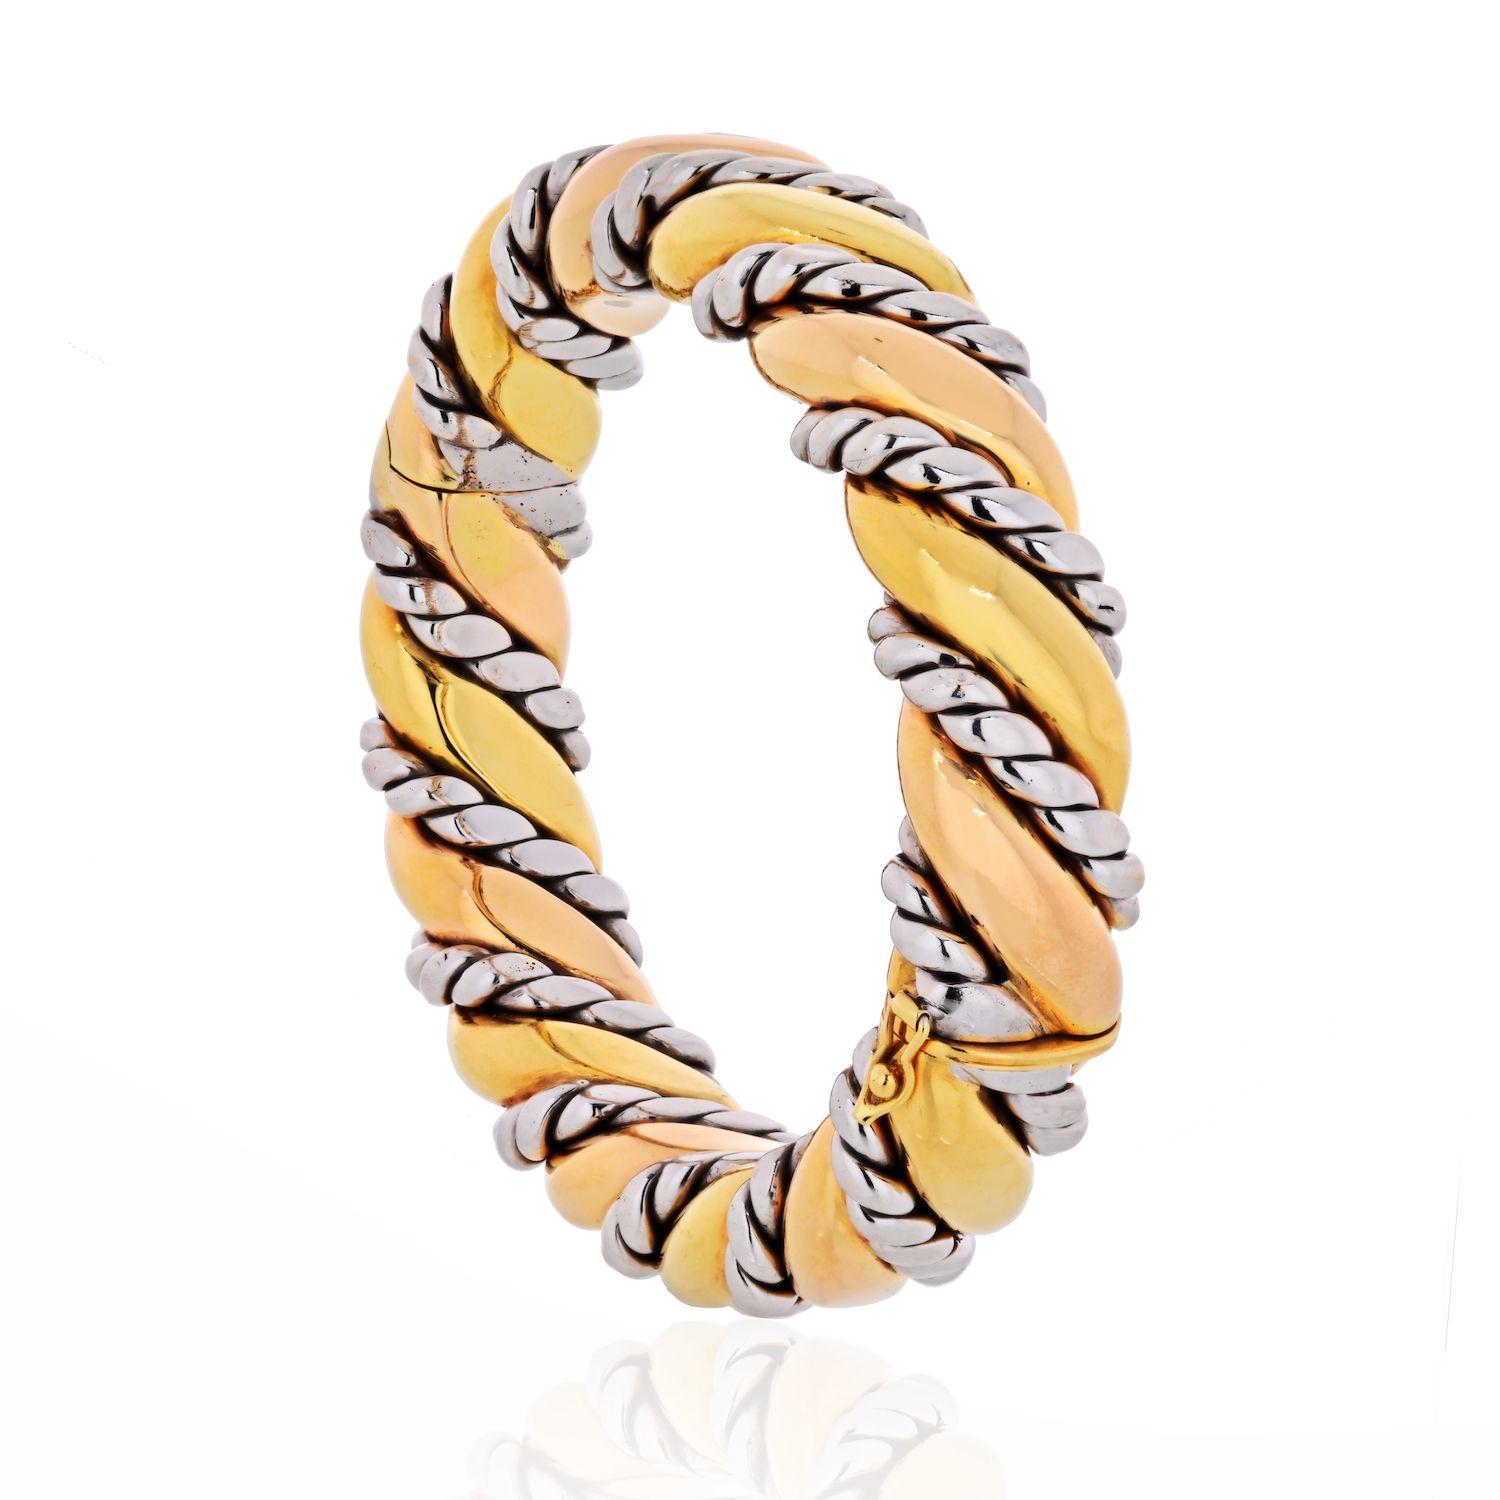 18K Two Tone Hinged & Textured Bangle Bracelet. 80gr. Fits a wrist that is 6.5 inches.
